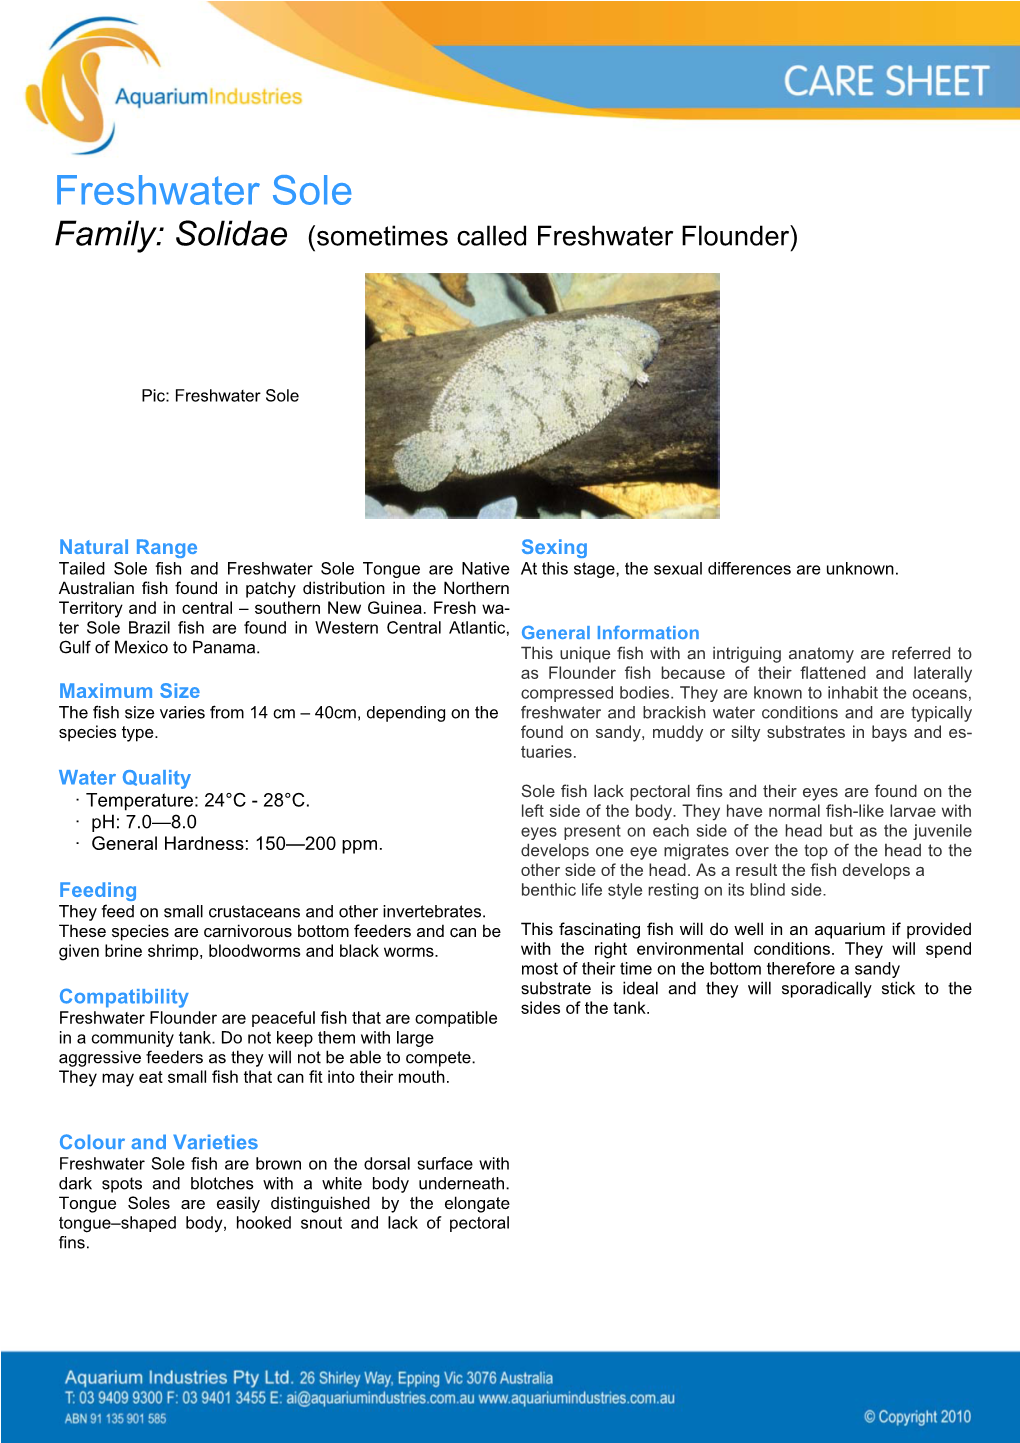 Freshwater Sole Family: Solidae (Sometimes Called Freshwater Flounder)